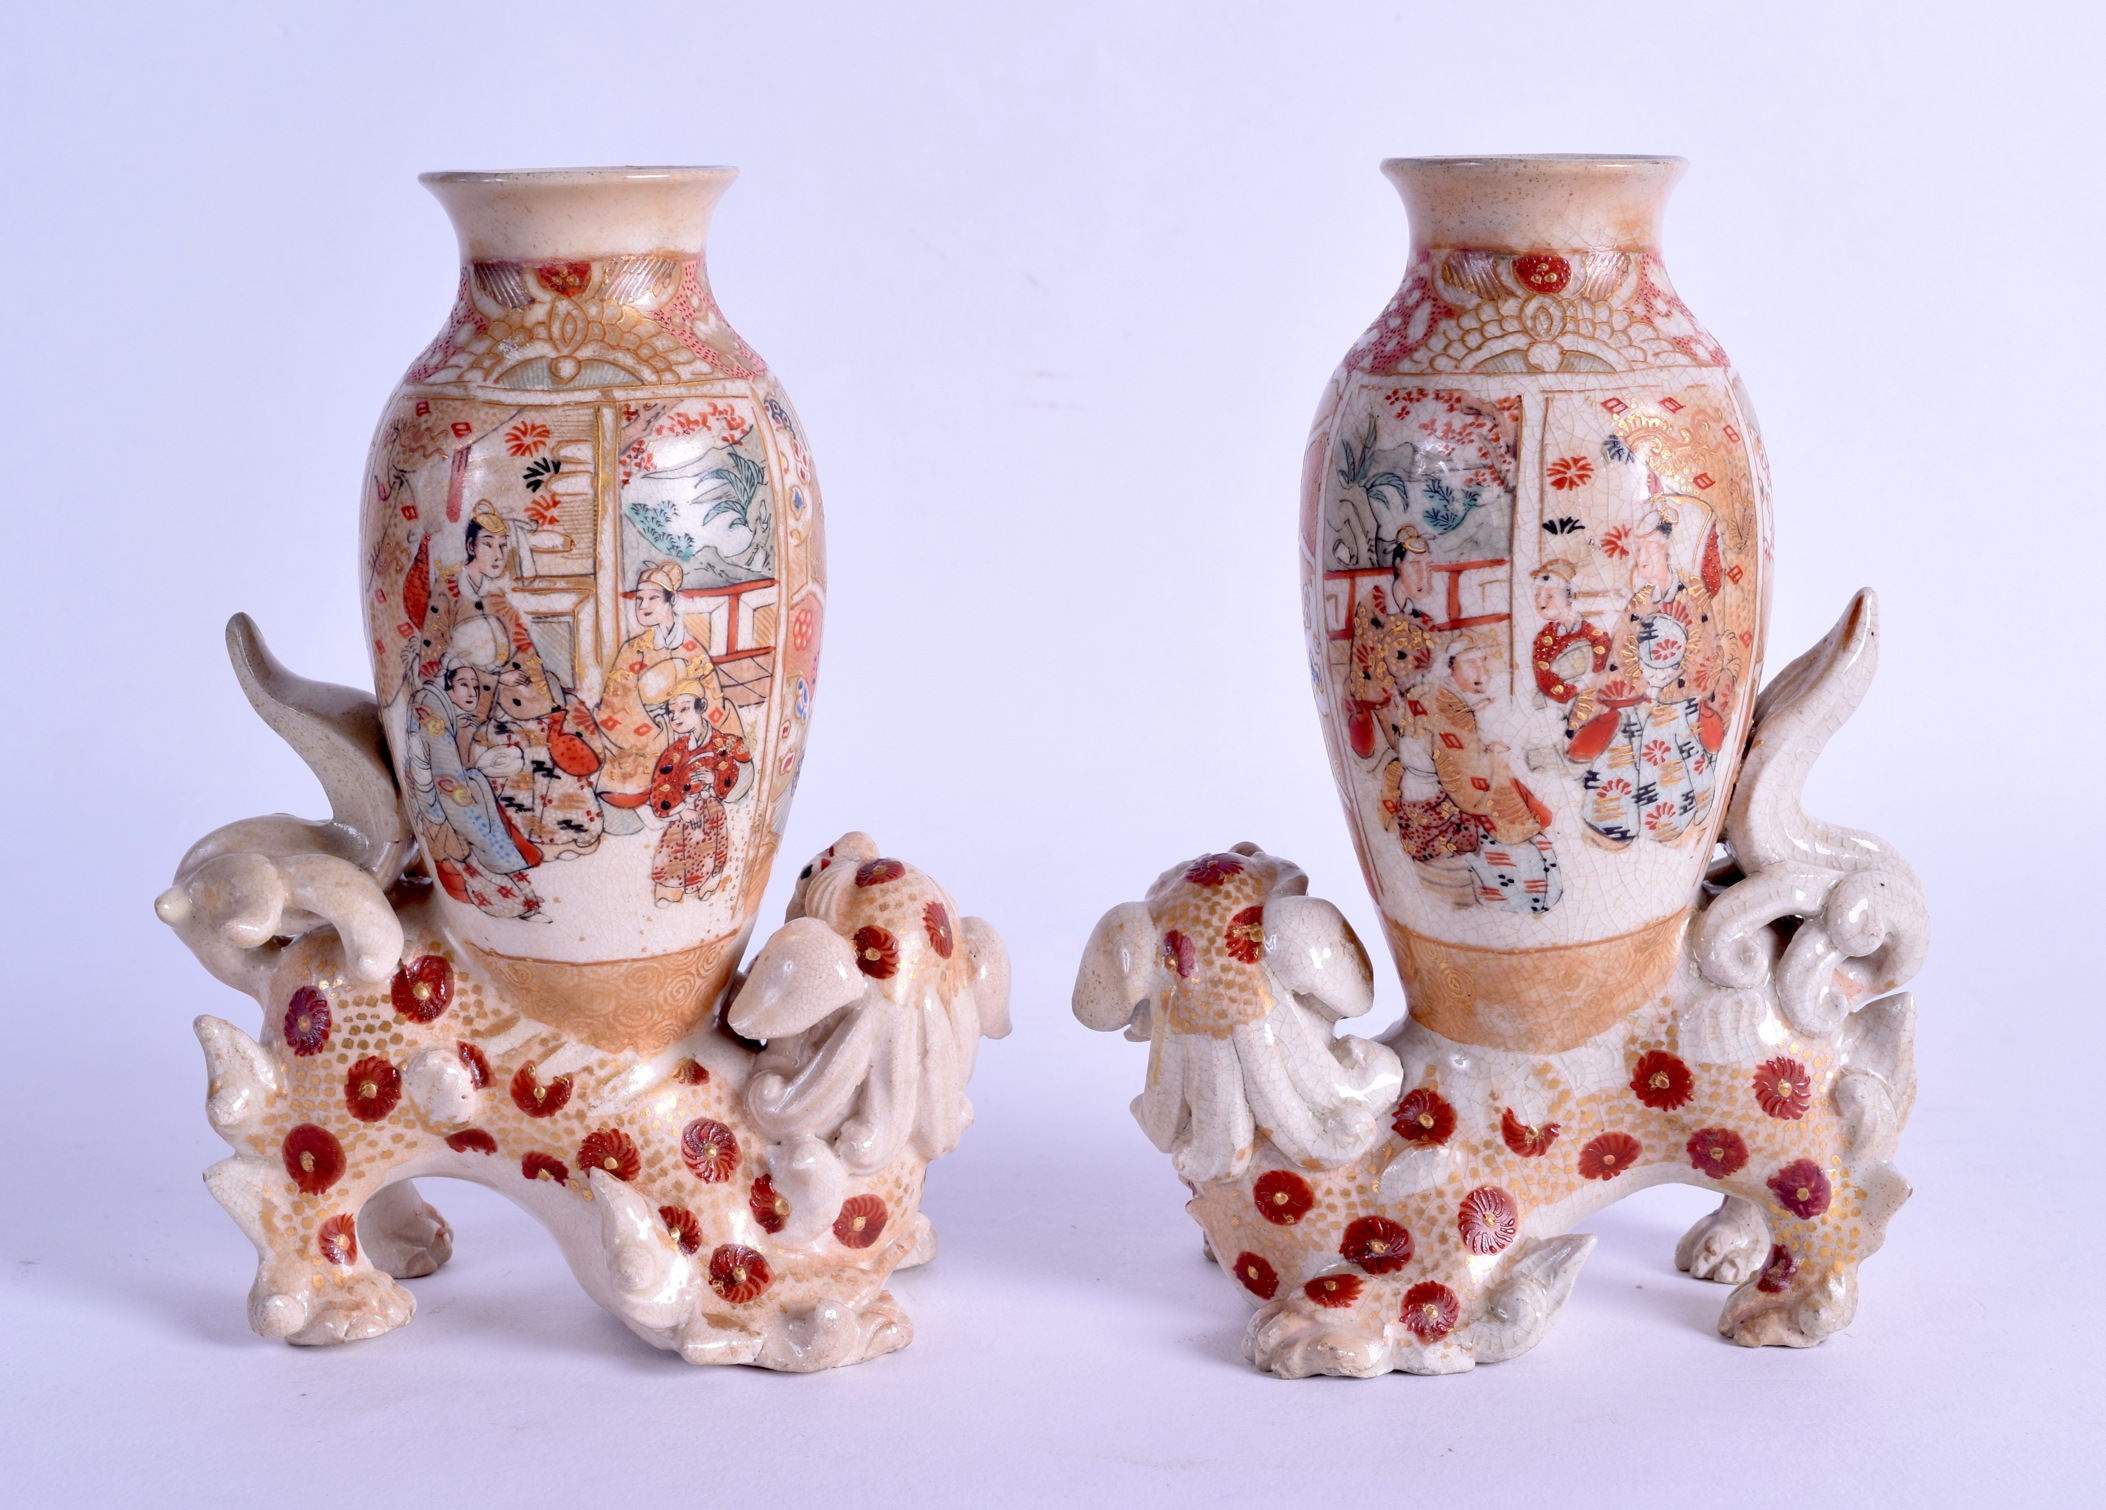 AN UNUSUAL PAIR OF LATE 19TH CENTURY JAPANESE MEIJI PERIOD SATSUMSA VASES modelled as buddhistic - Image 2 of 3